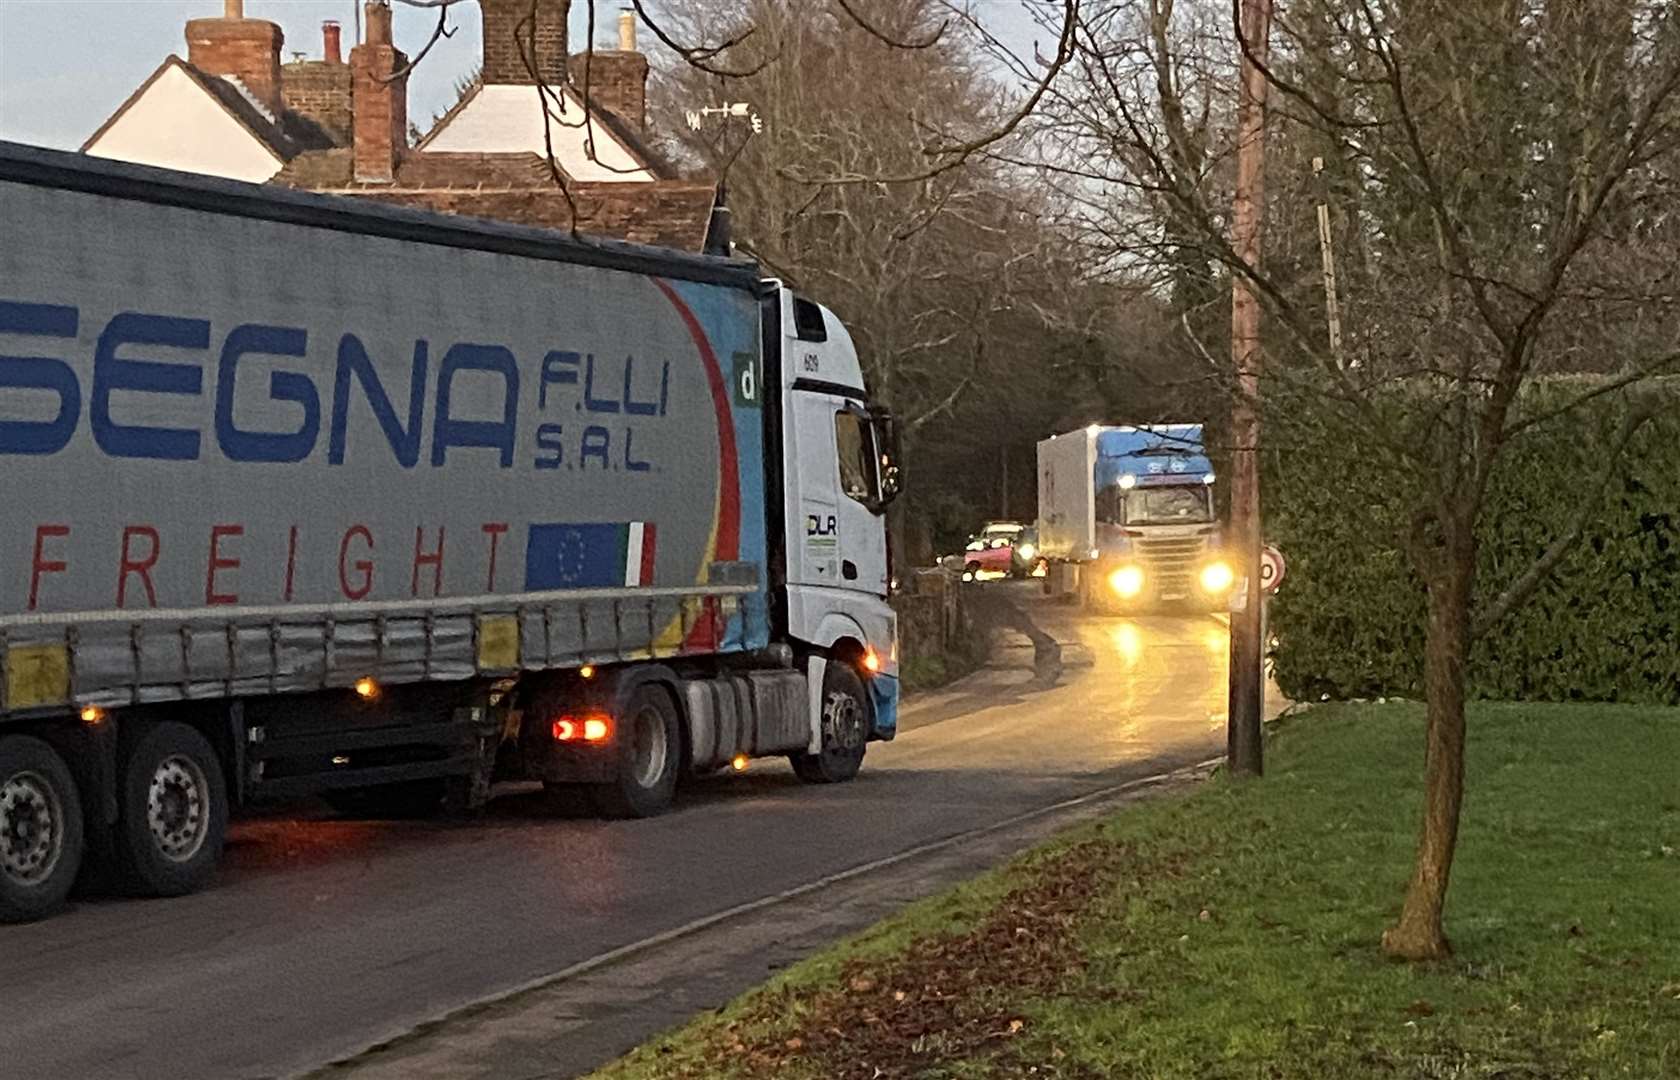 Just two of the lorries in Mersham last week after truckers were given the wrong postcode. Picture: Stewart Ross